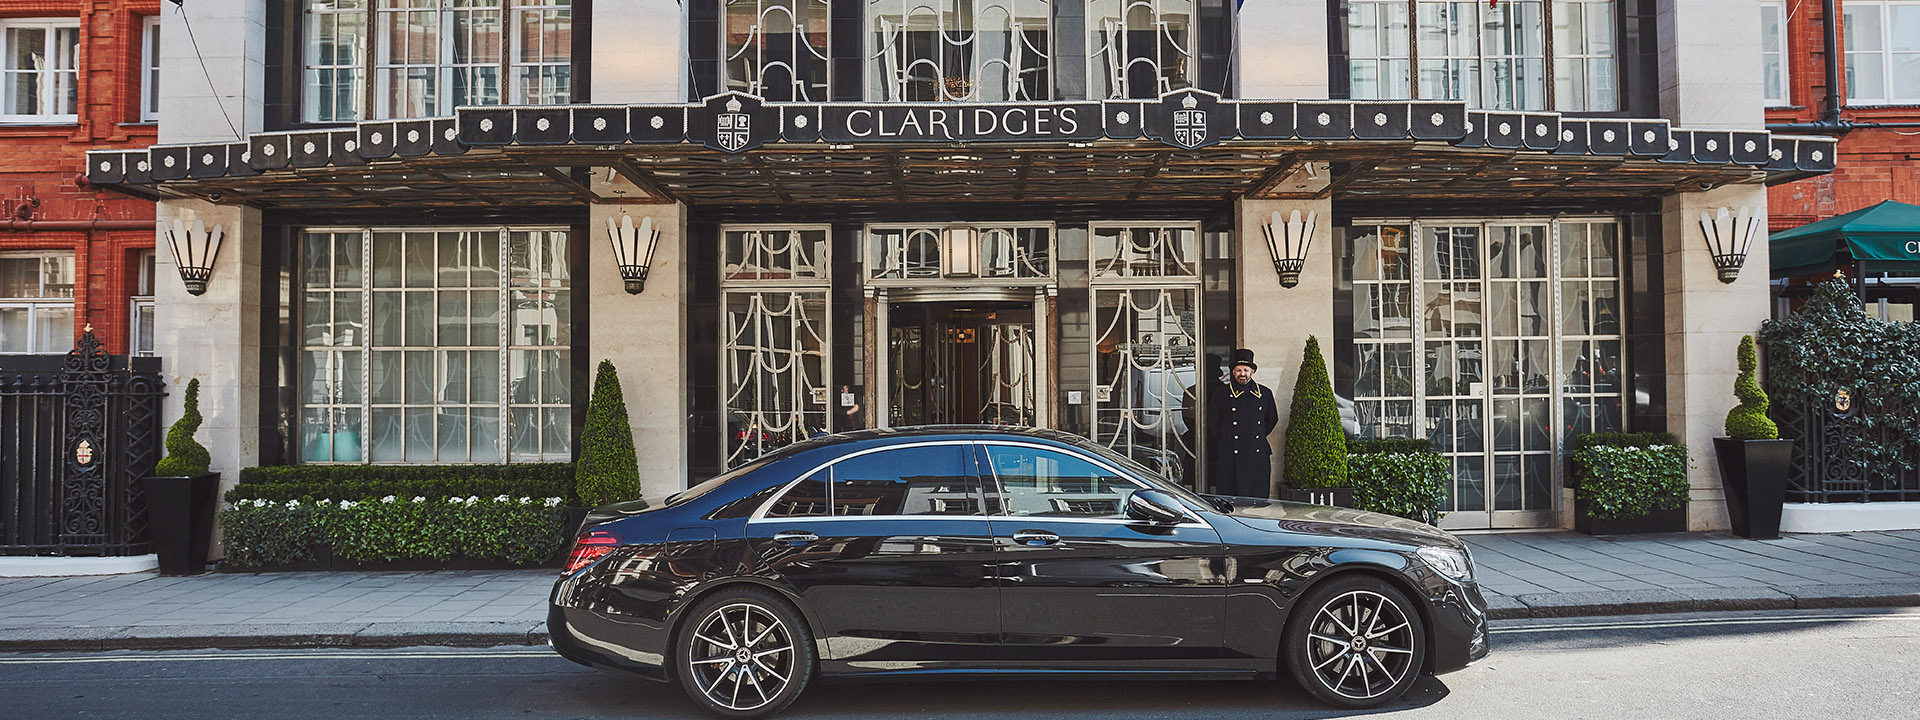 Display of a car in front of the entrance of Claridge's Hotel as well as a friendly doorman.